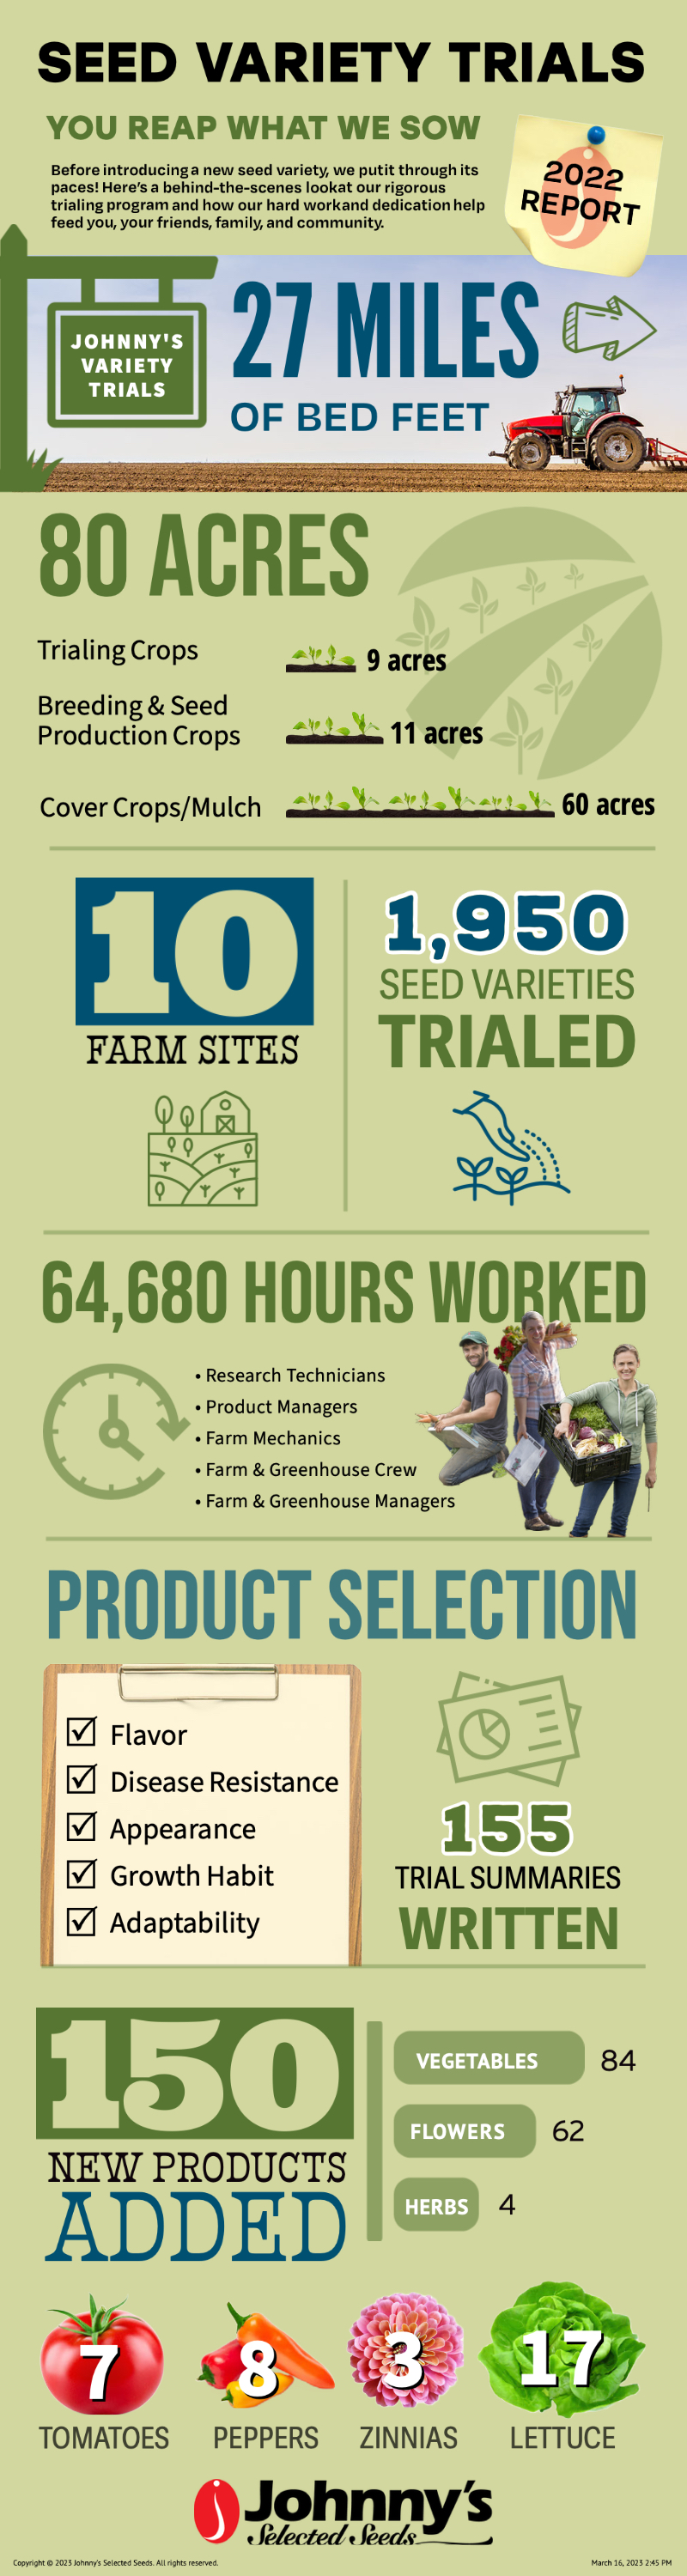 Seed Variety Trials at Johnny's Selected Seeds • Infographic